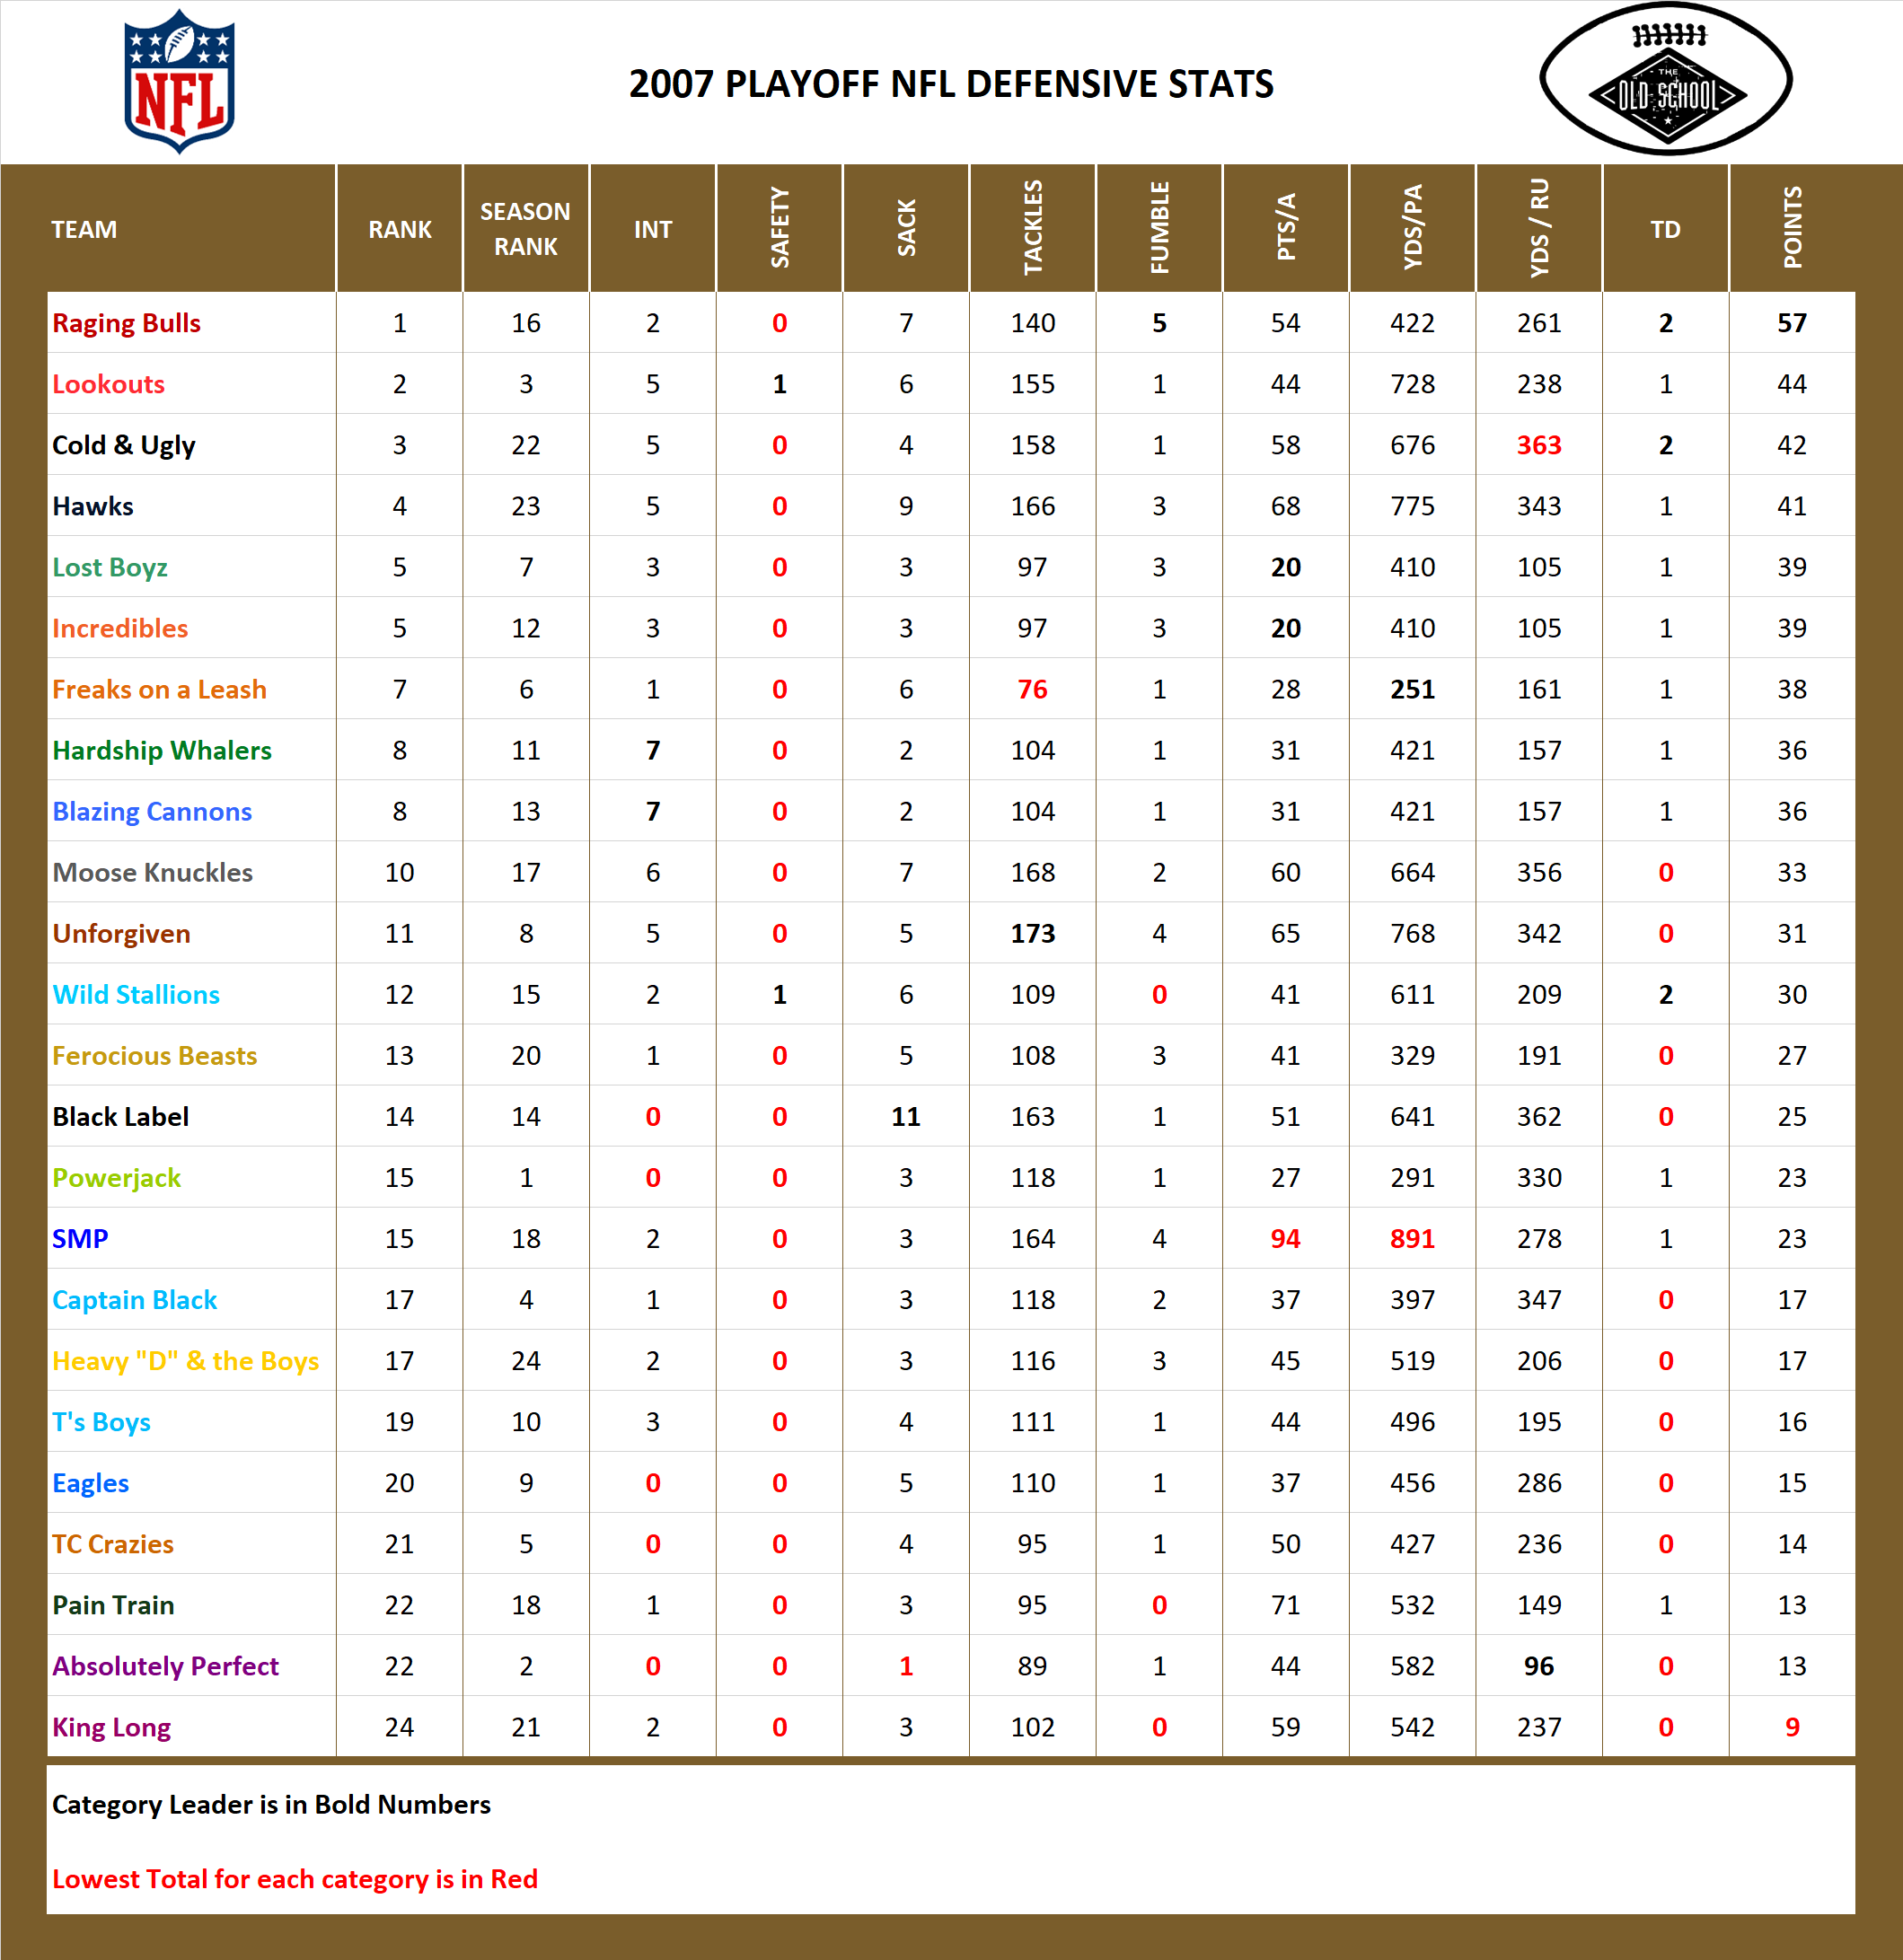 2007 National Football League Pool Playoff Defensive Stats